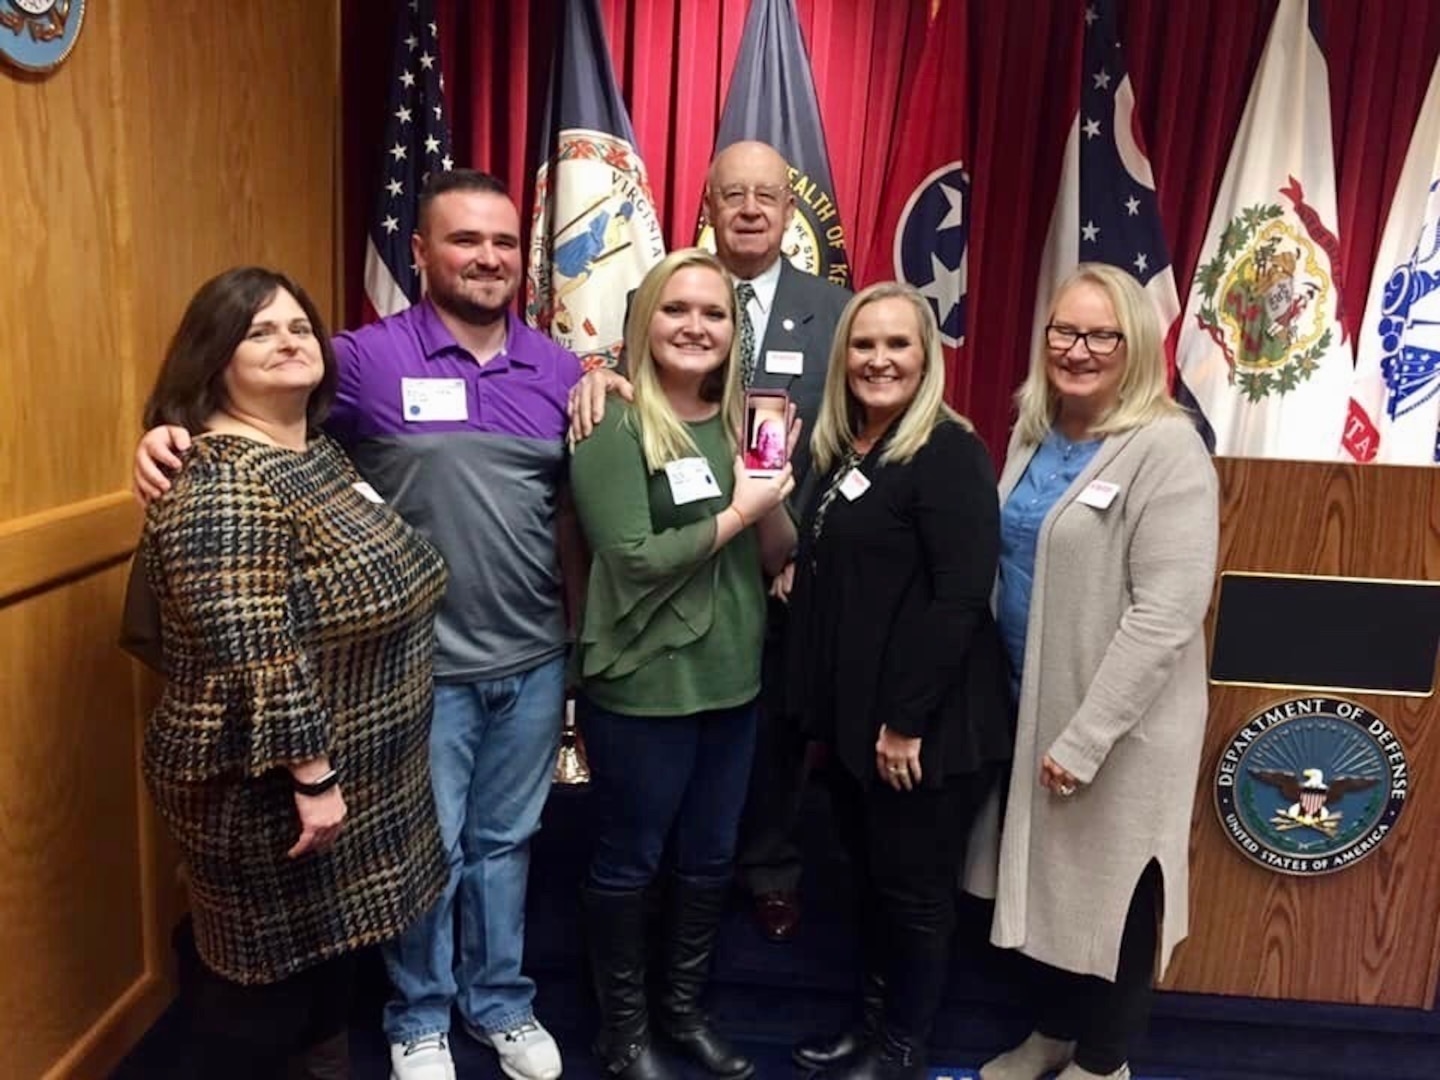 Tyler Phillips stands with his family after taking the oath of enlistment from his grandfather Daniel Phillips, a former Troop Commander in the 1-150th Cavalry Regiment, West Virginia Army National Guard.